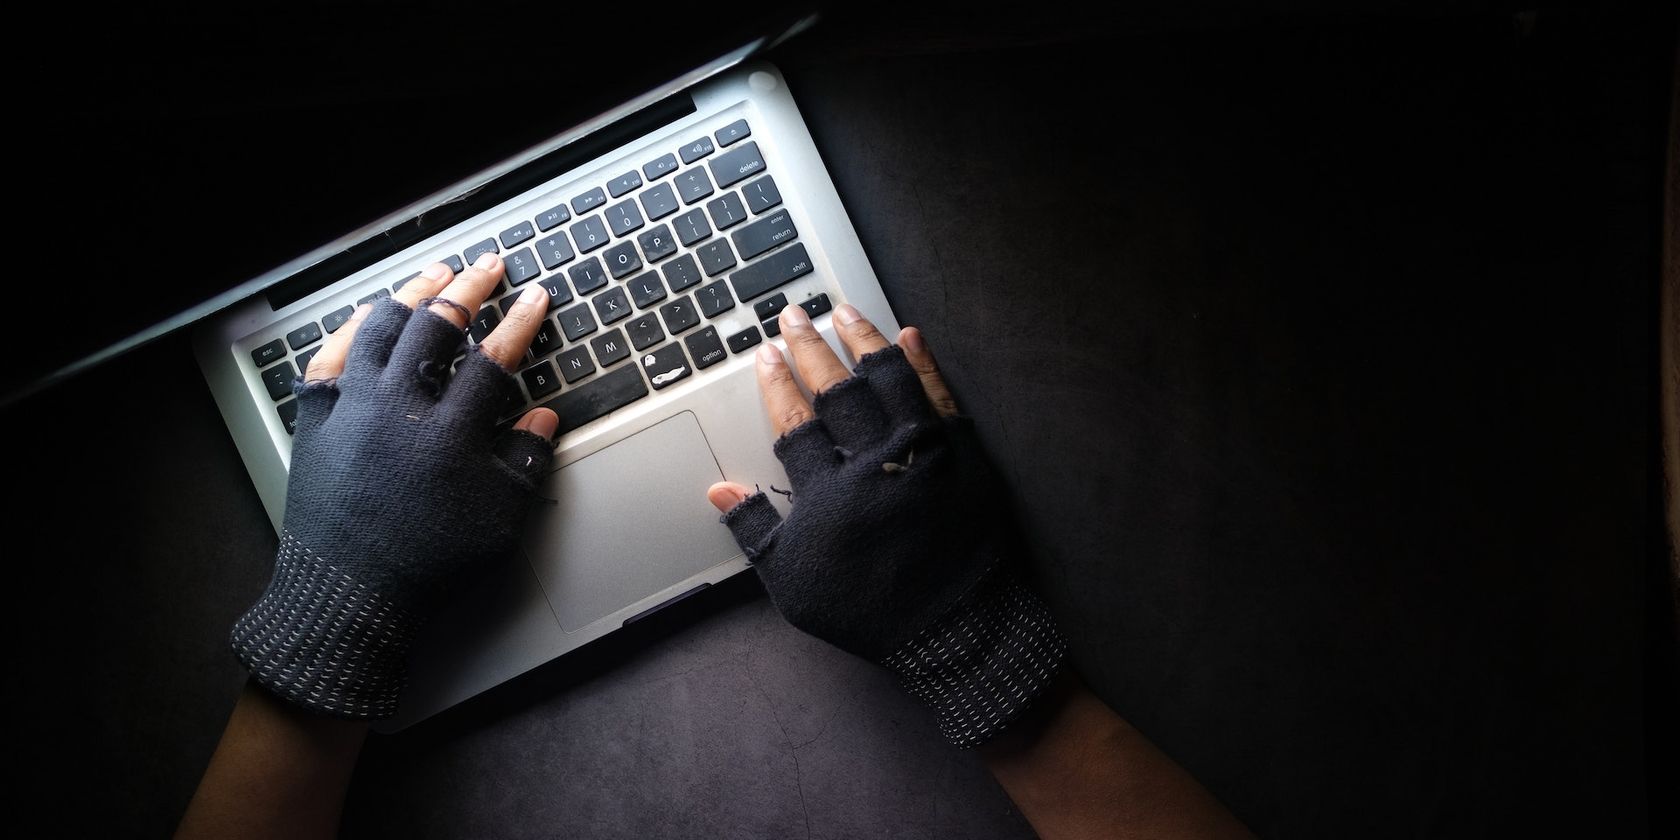 a person typing on a laptop while wearing a pair of fingerless gloves